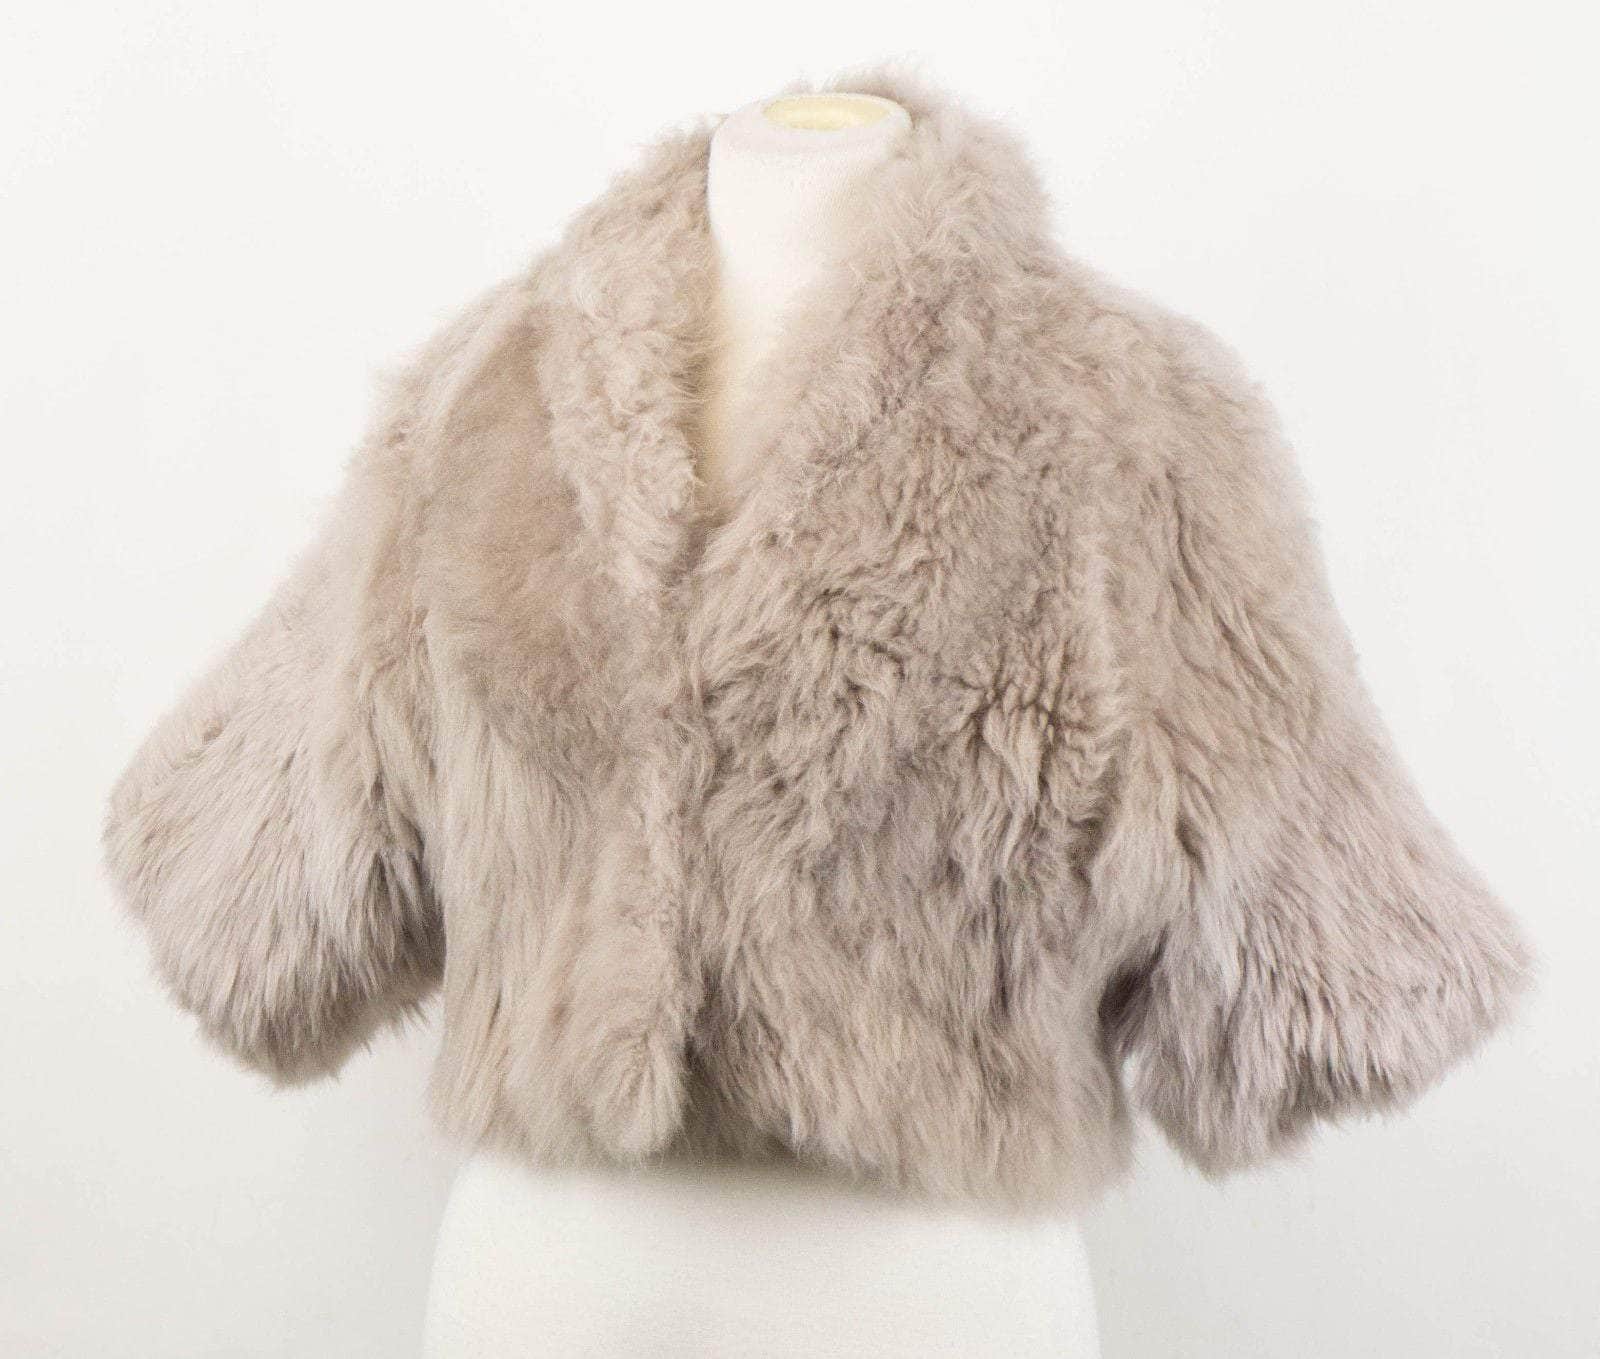 Brunello Cucinelli Outerwear Aug-44 Cashmere Fur Shearling Leather Jacket - Gray JF1-R4-7/8 JF1-R4-7/8